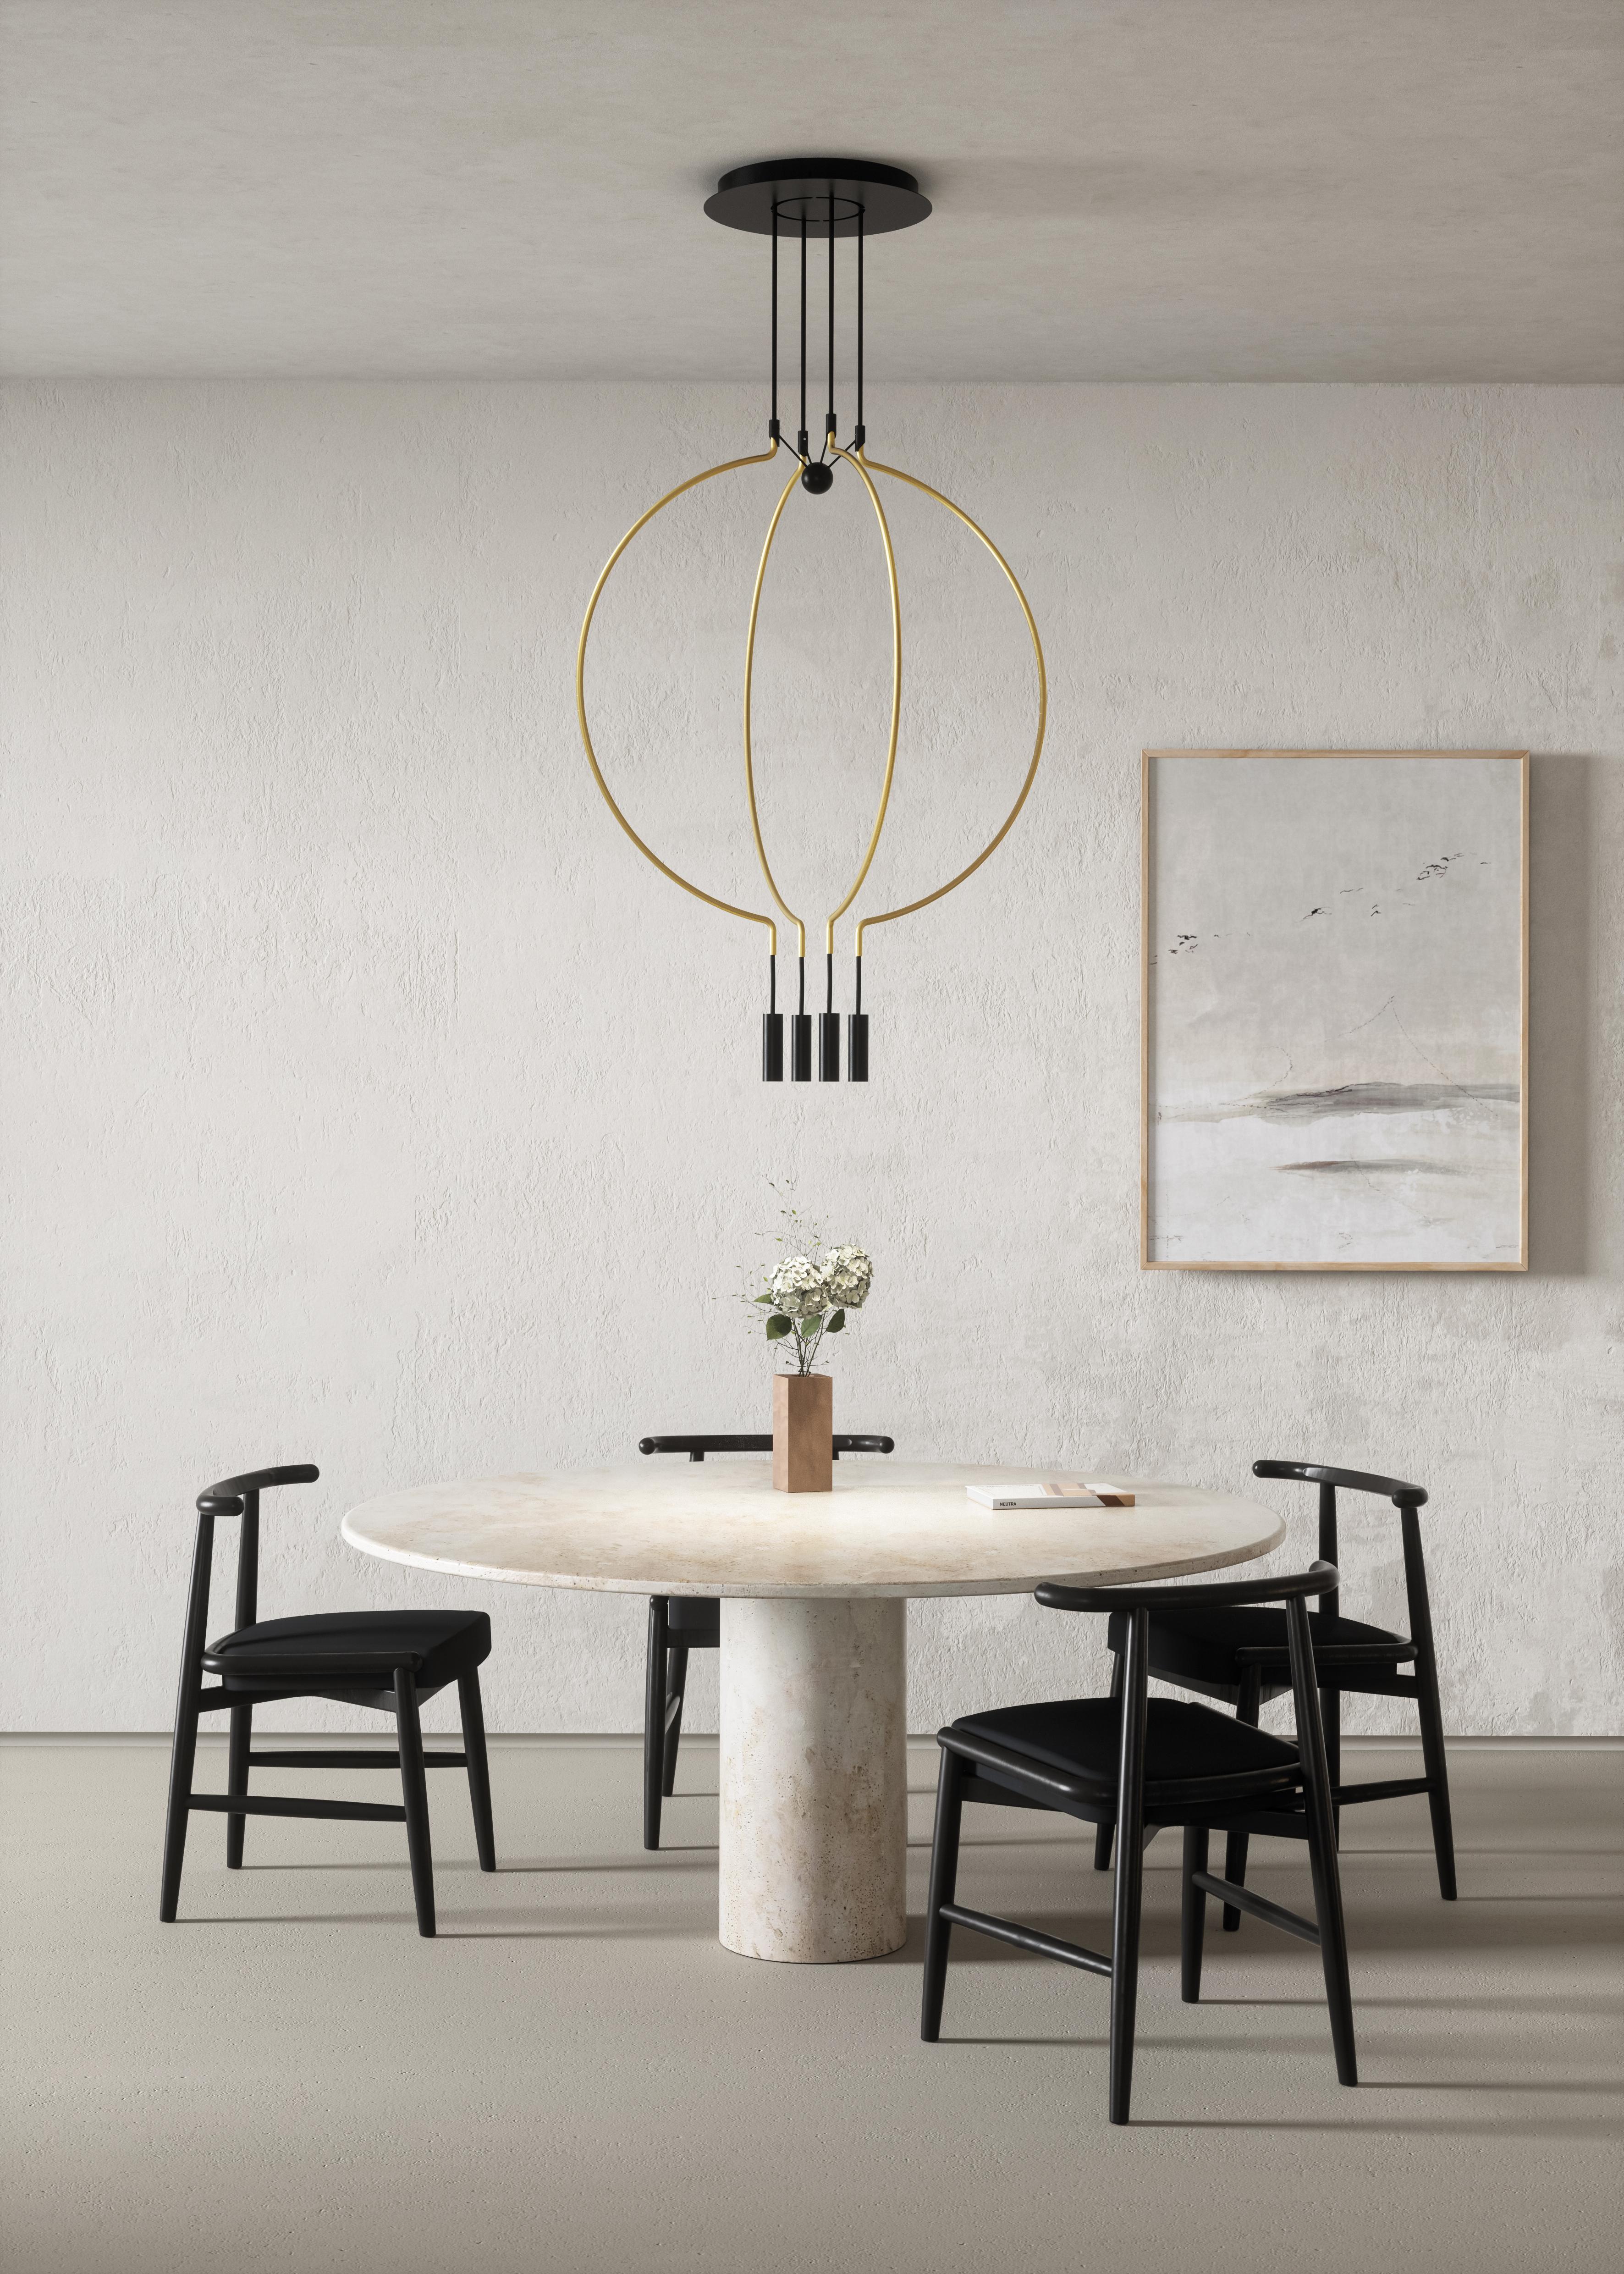 Axolight Liaison Model G8 Pendant Lamp in Black/Black by Sara Moroni

Modular lightness and elegance. Liaison tells about the perfect balance of three geometric archetypes: sphere, circle and cylinder compose a system that includes the single